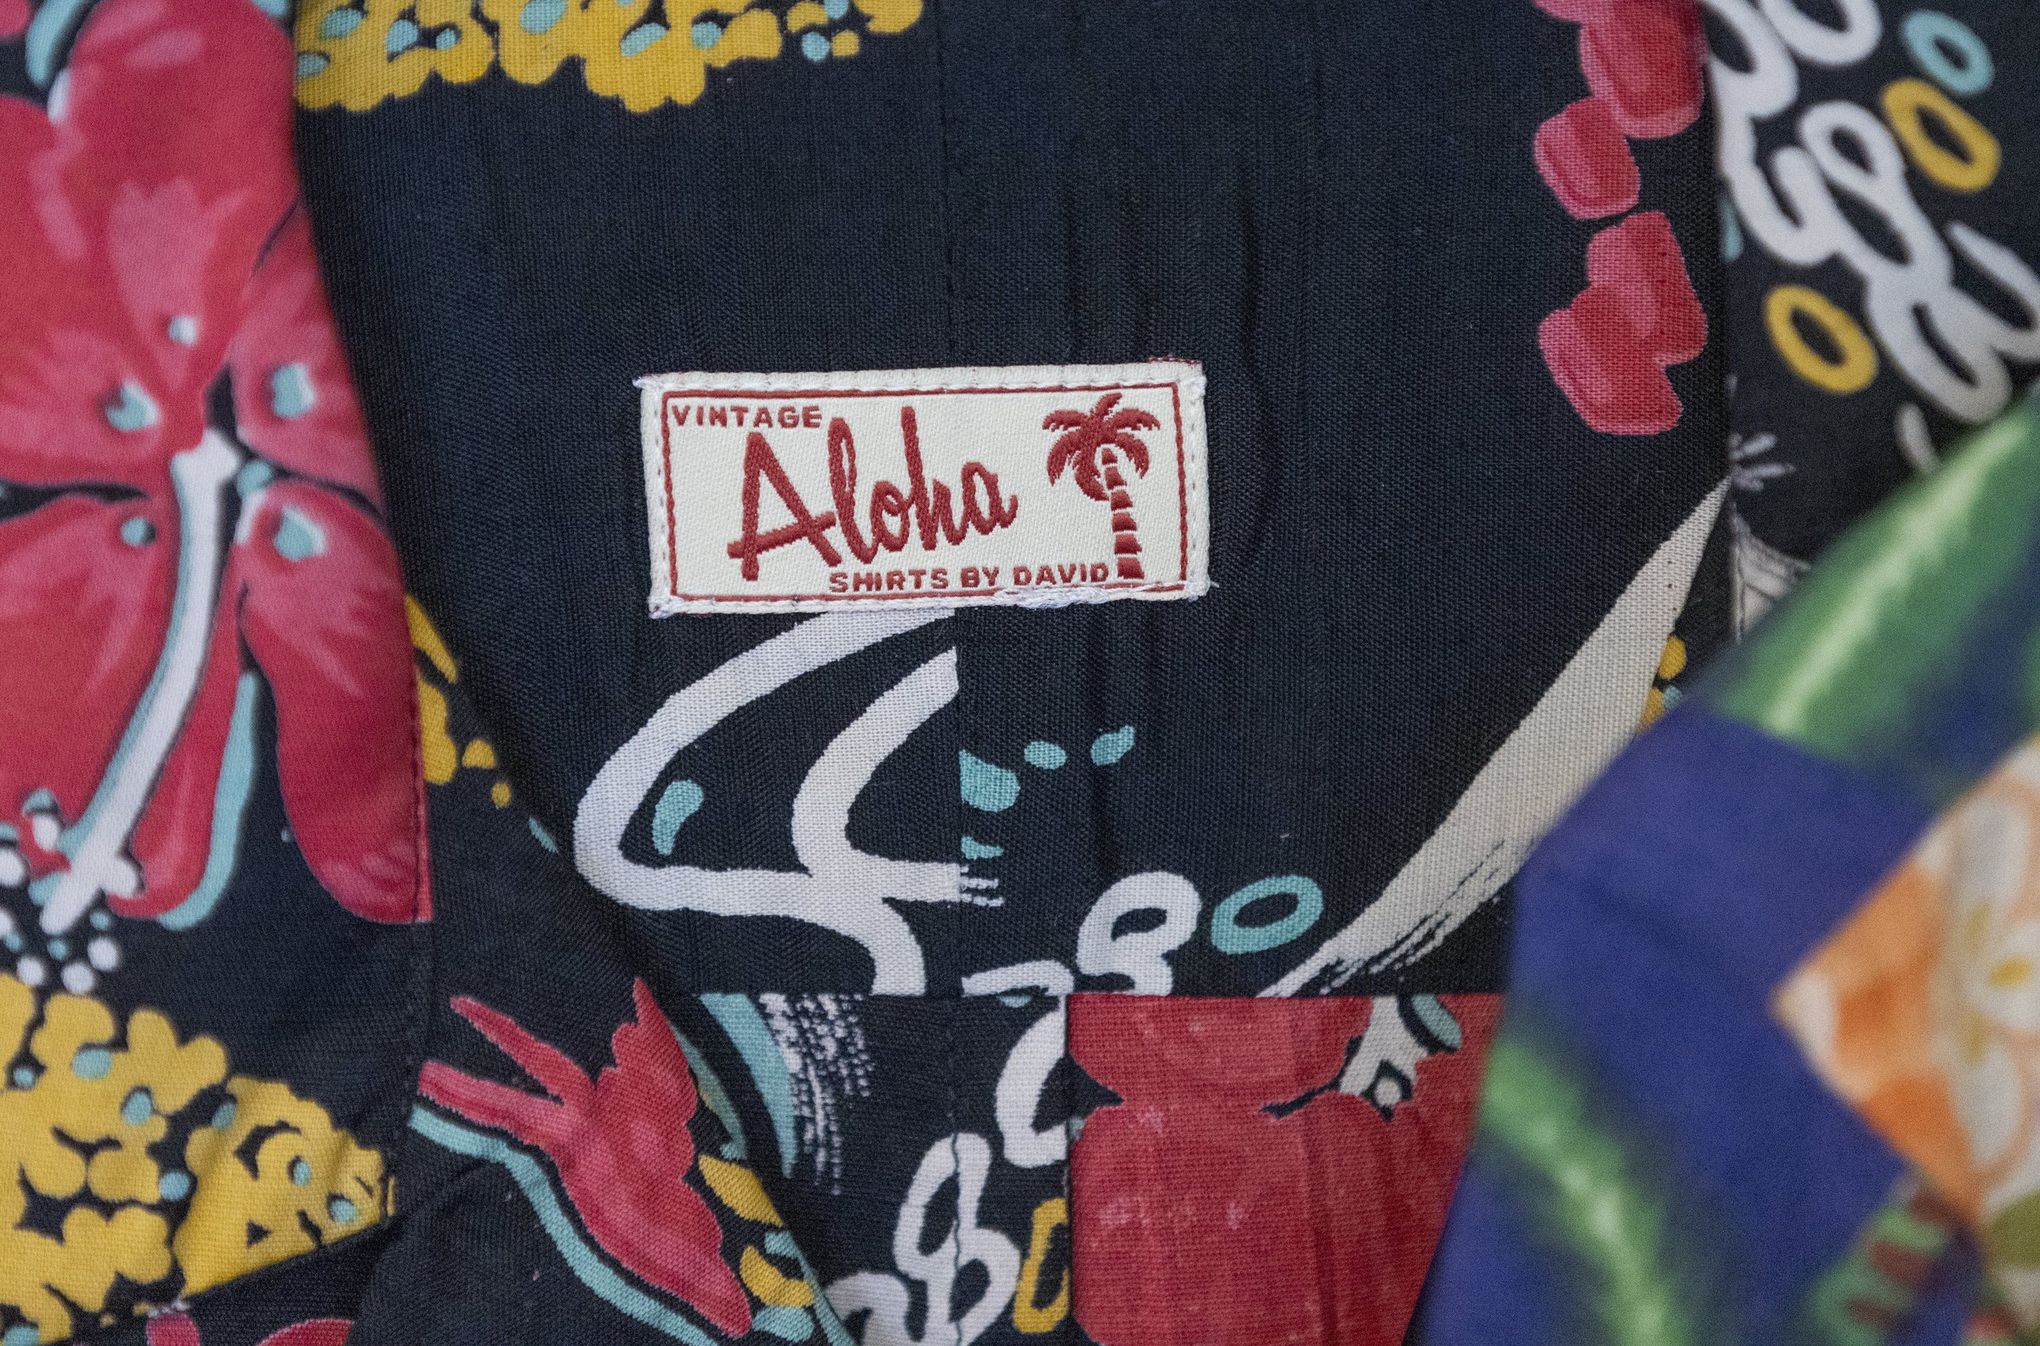 The Aloha shirt is being reclaimed by Polynesian designers